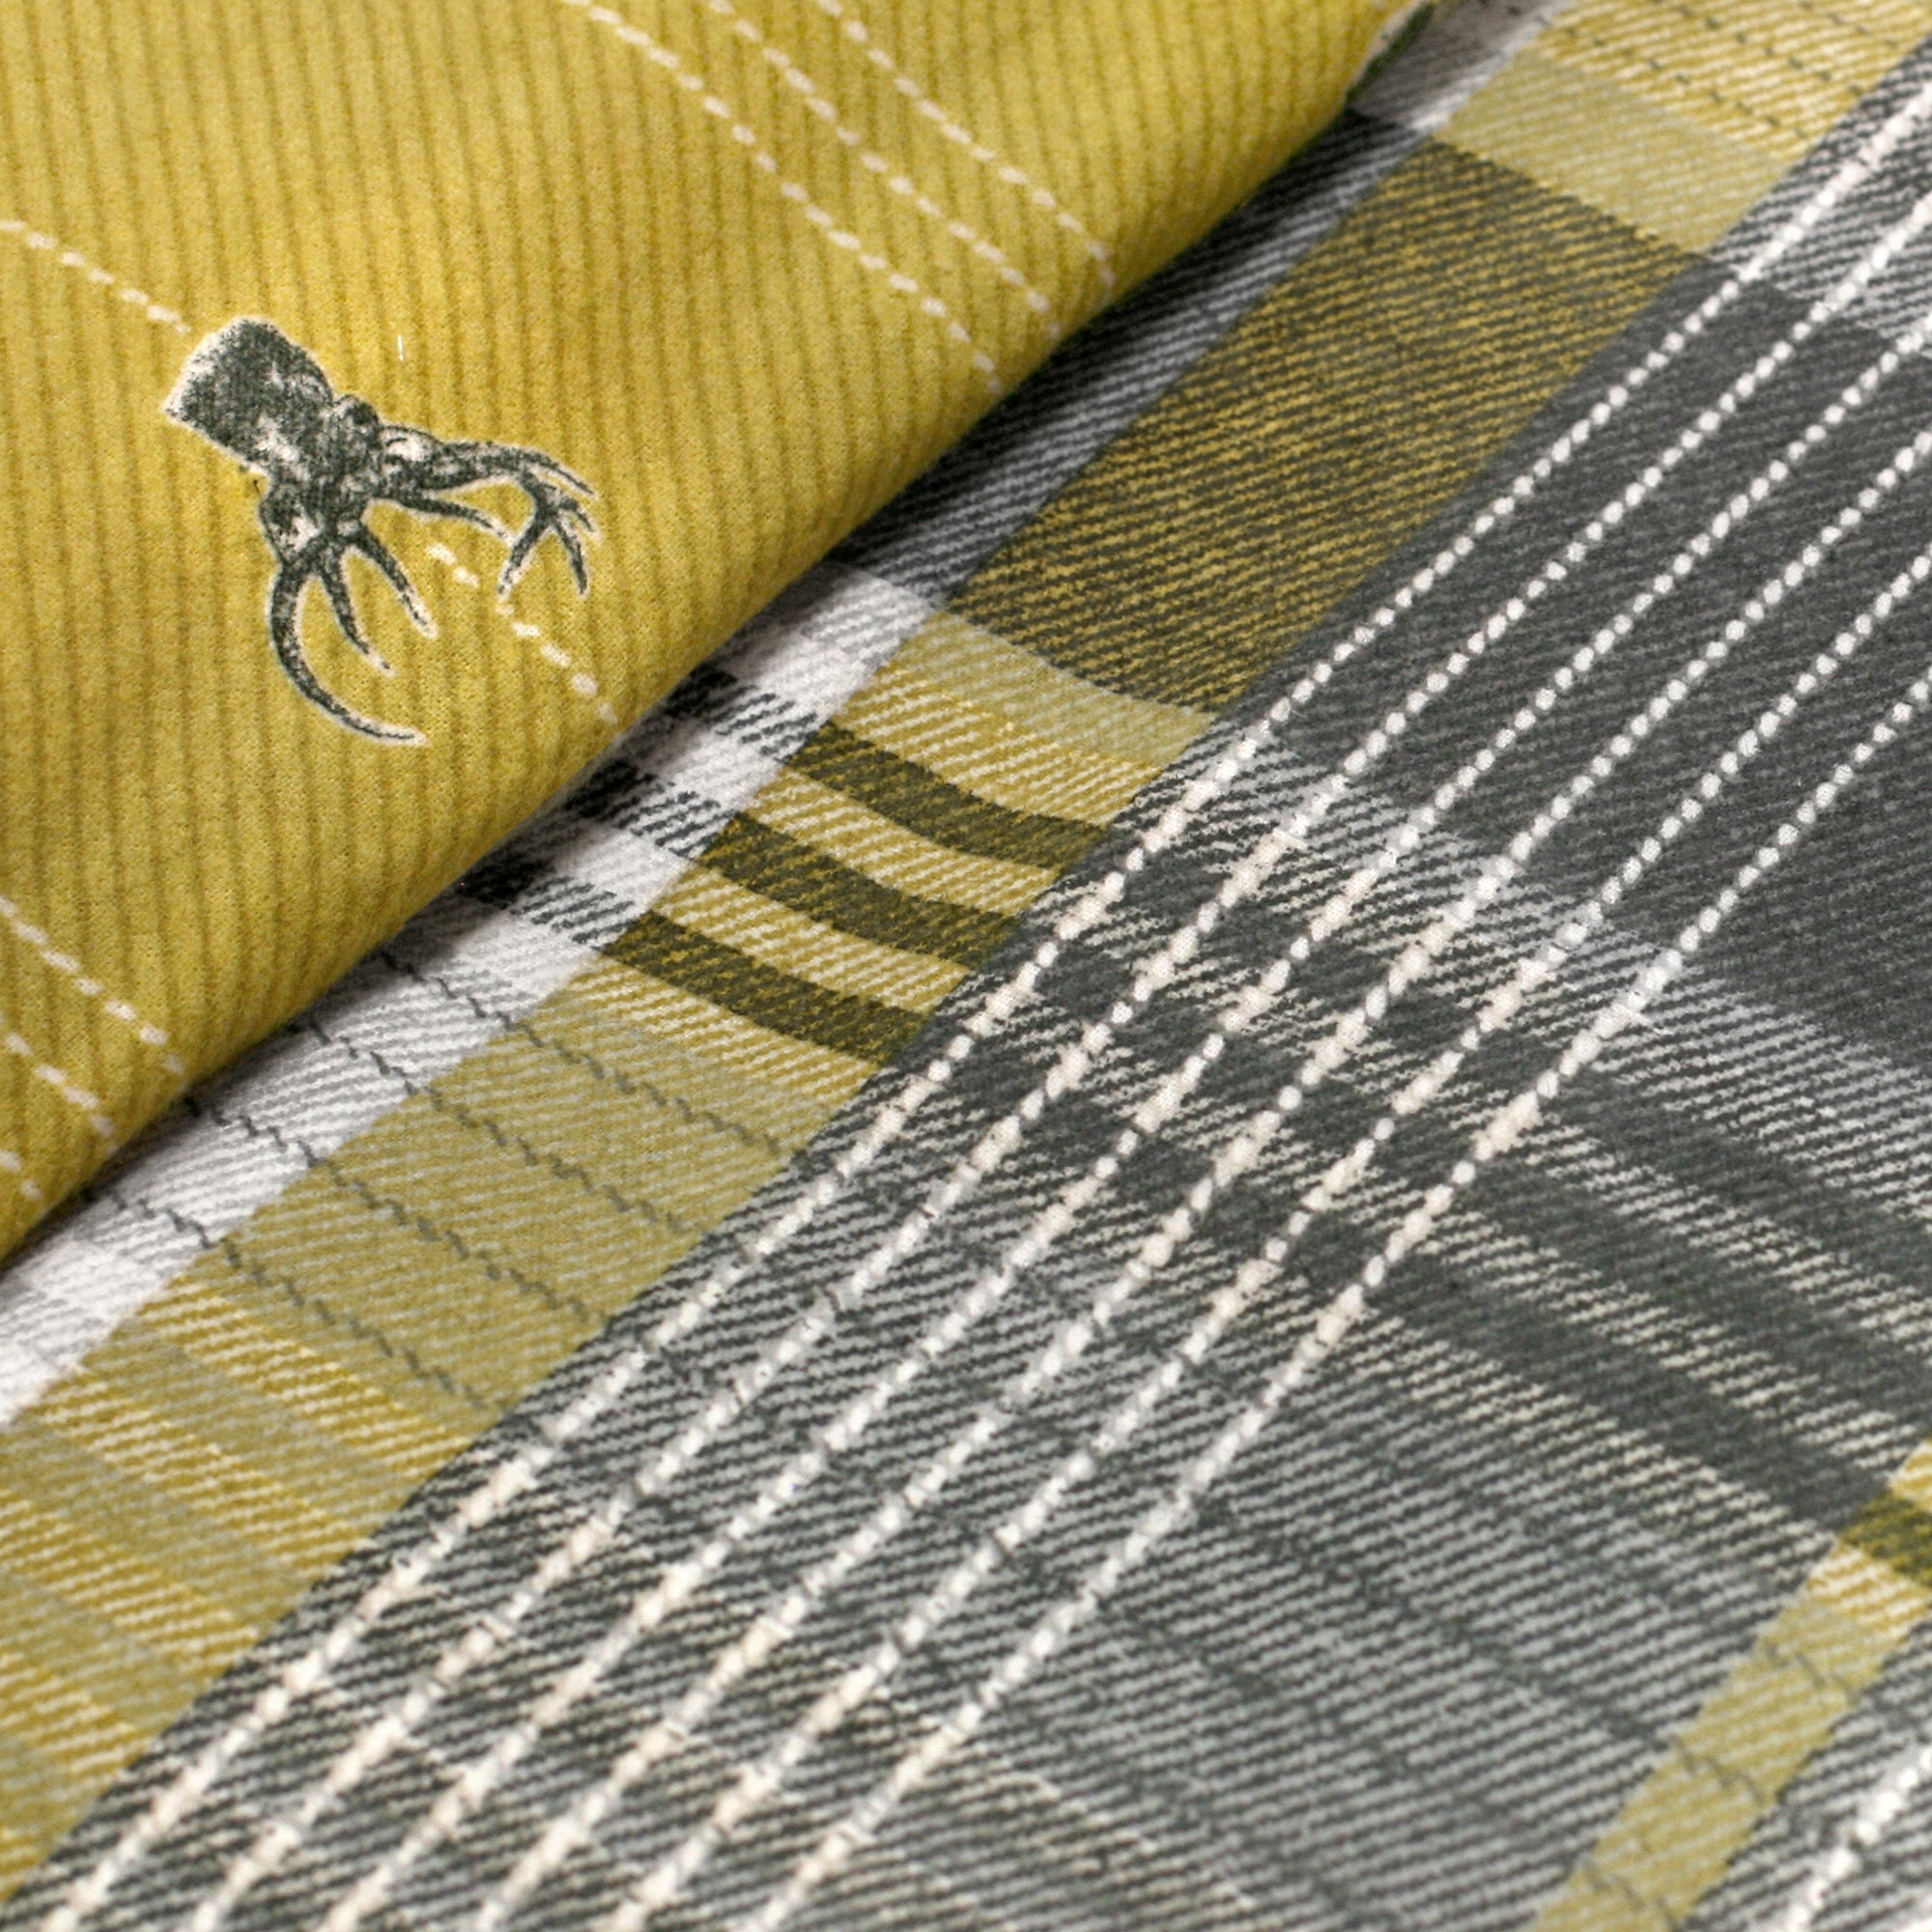 Connolly Check - 100% Brushed Cotton Checked Duvet Set in Ochre- by D&D Lodge